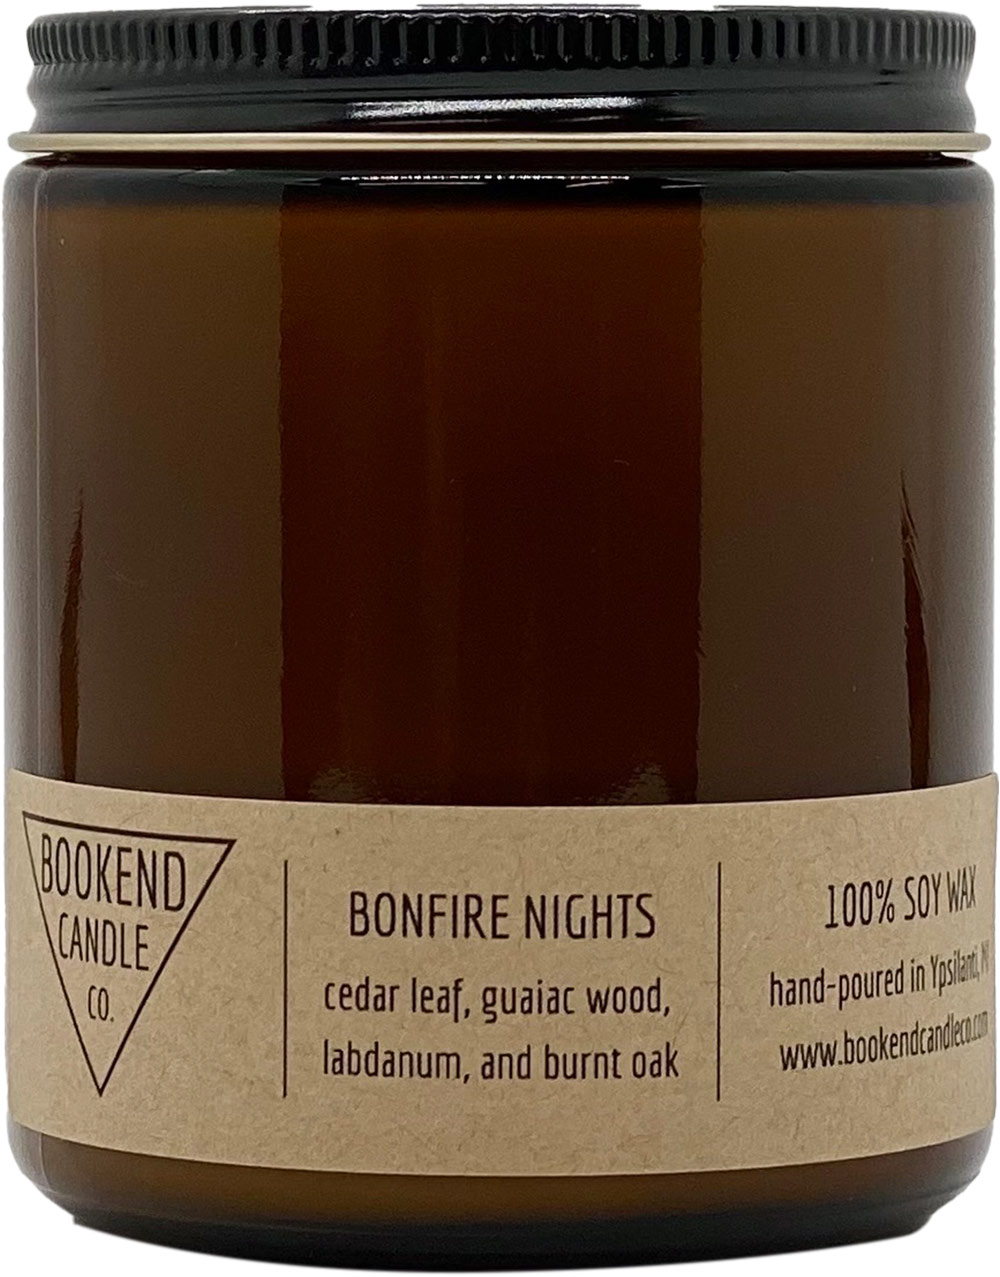 Bookend Candle Co. Bonfire Nights Soy Candle